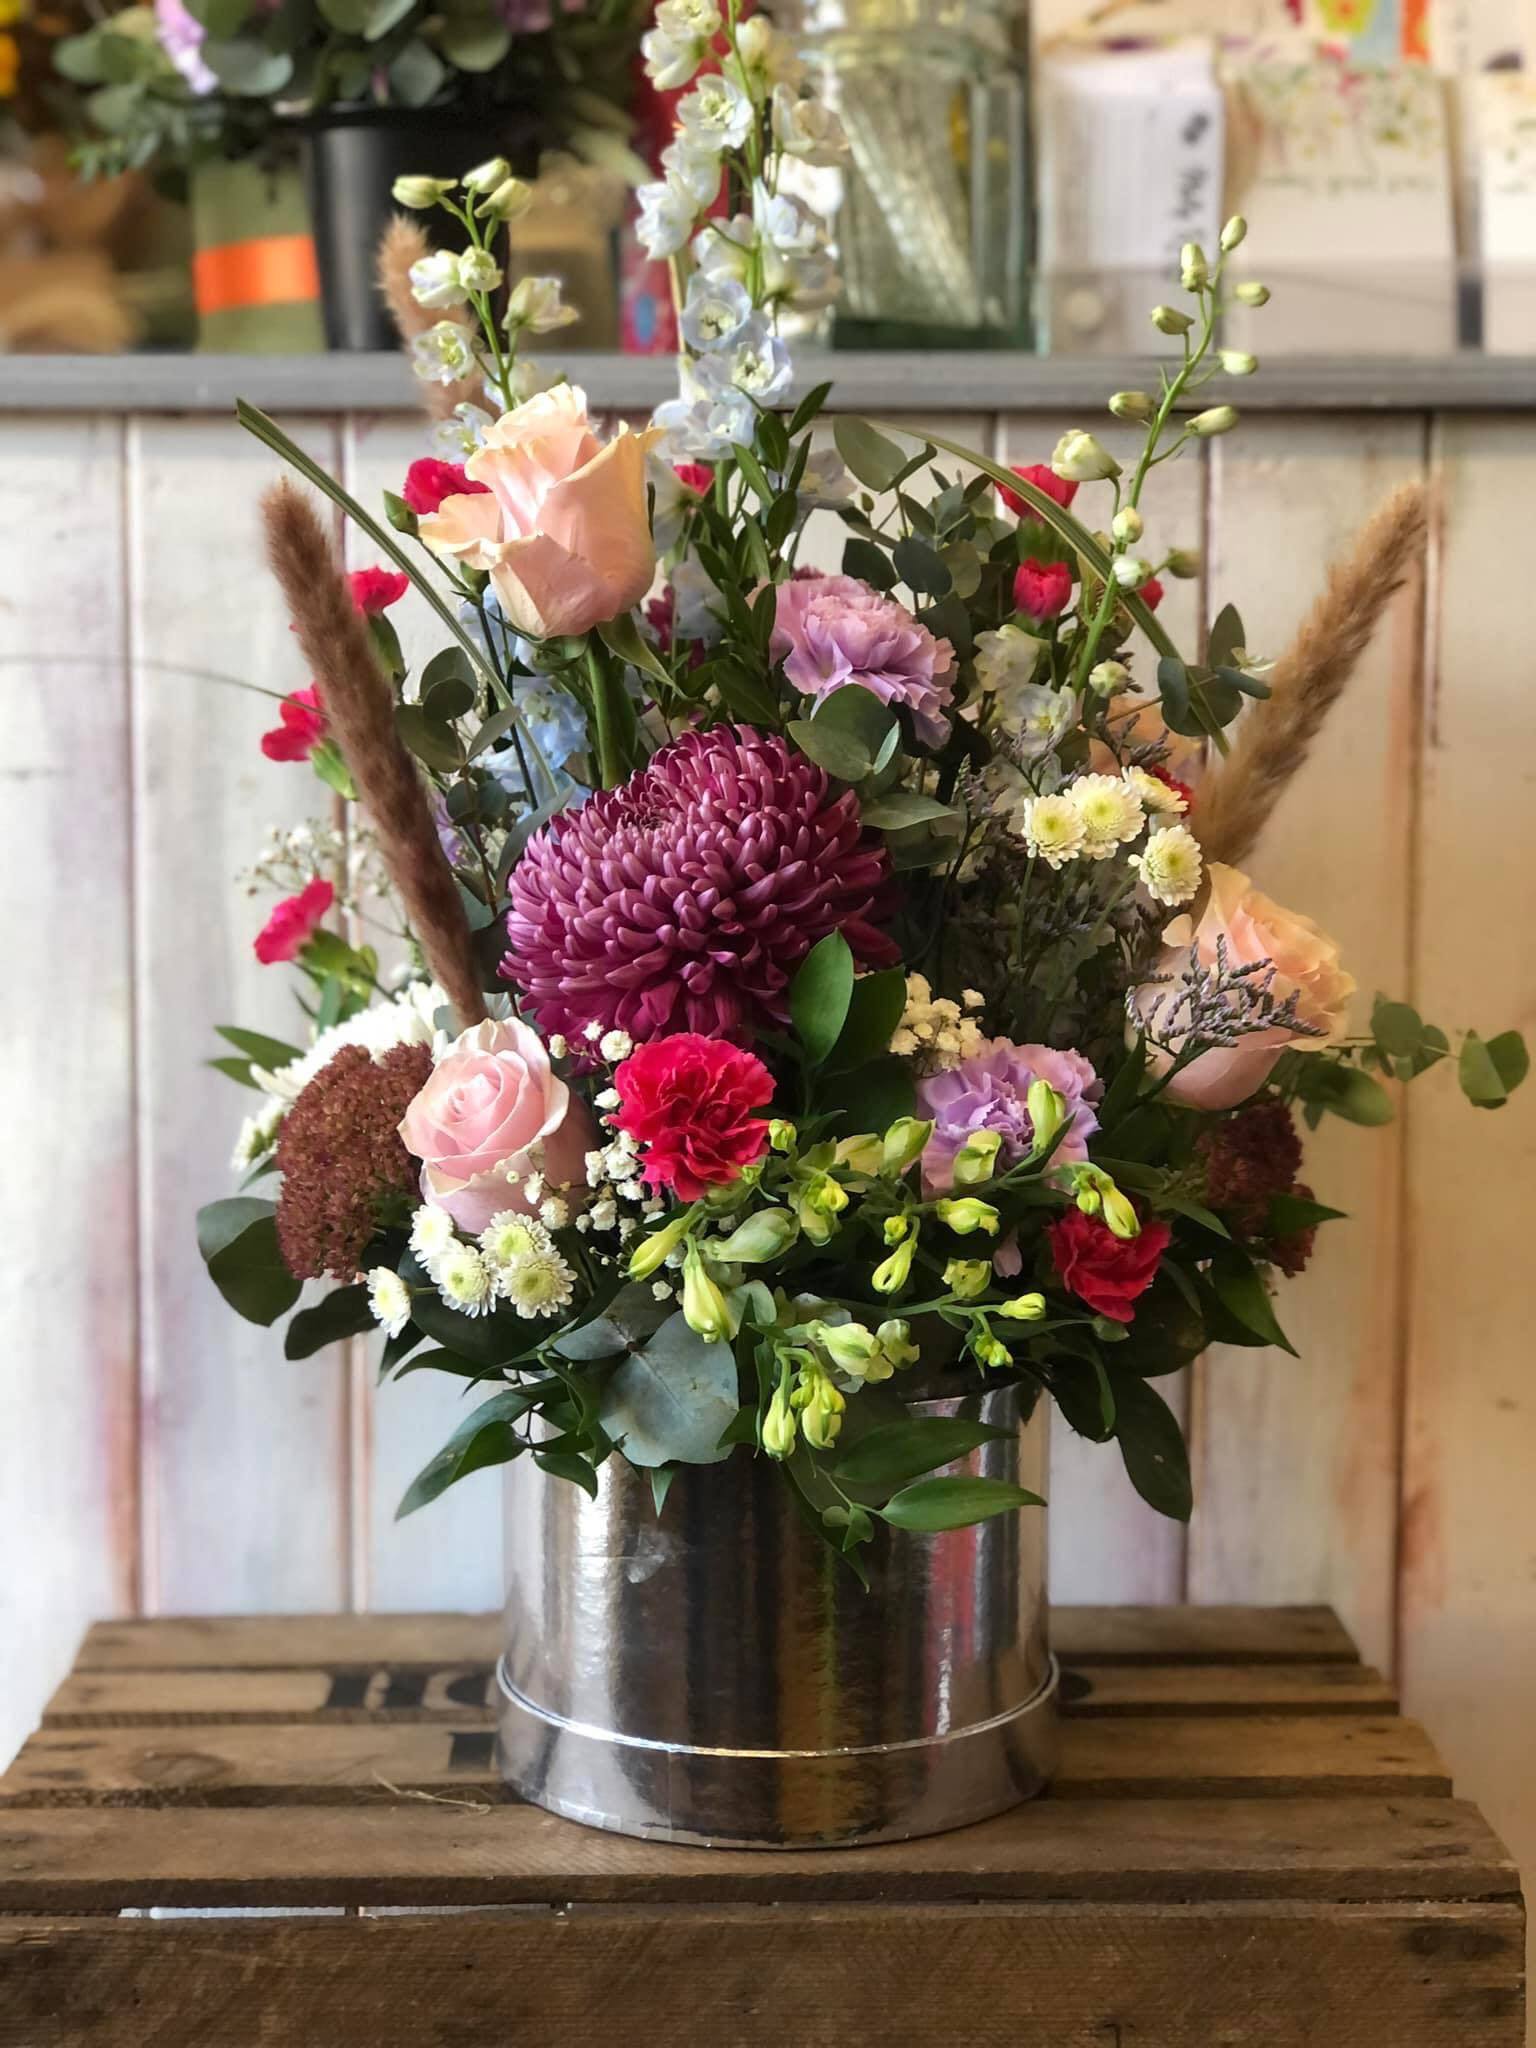 Paula and Morgan create bespoke bouquest and floral displays